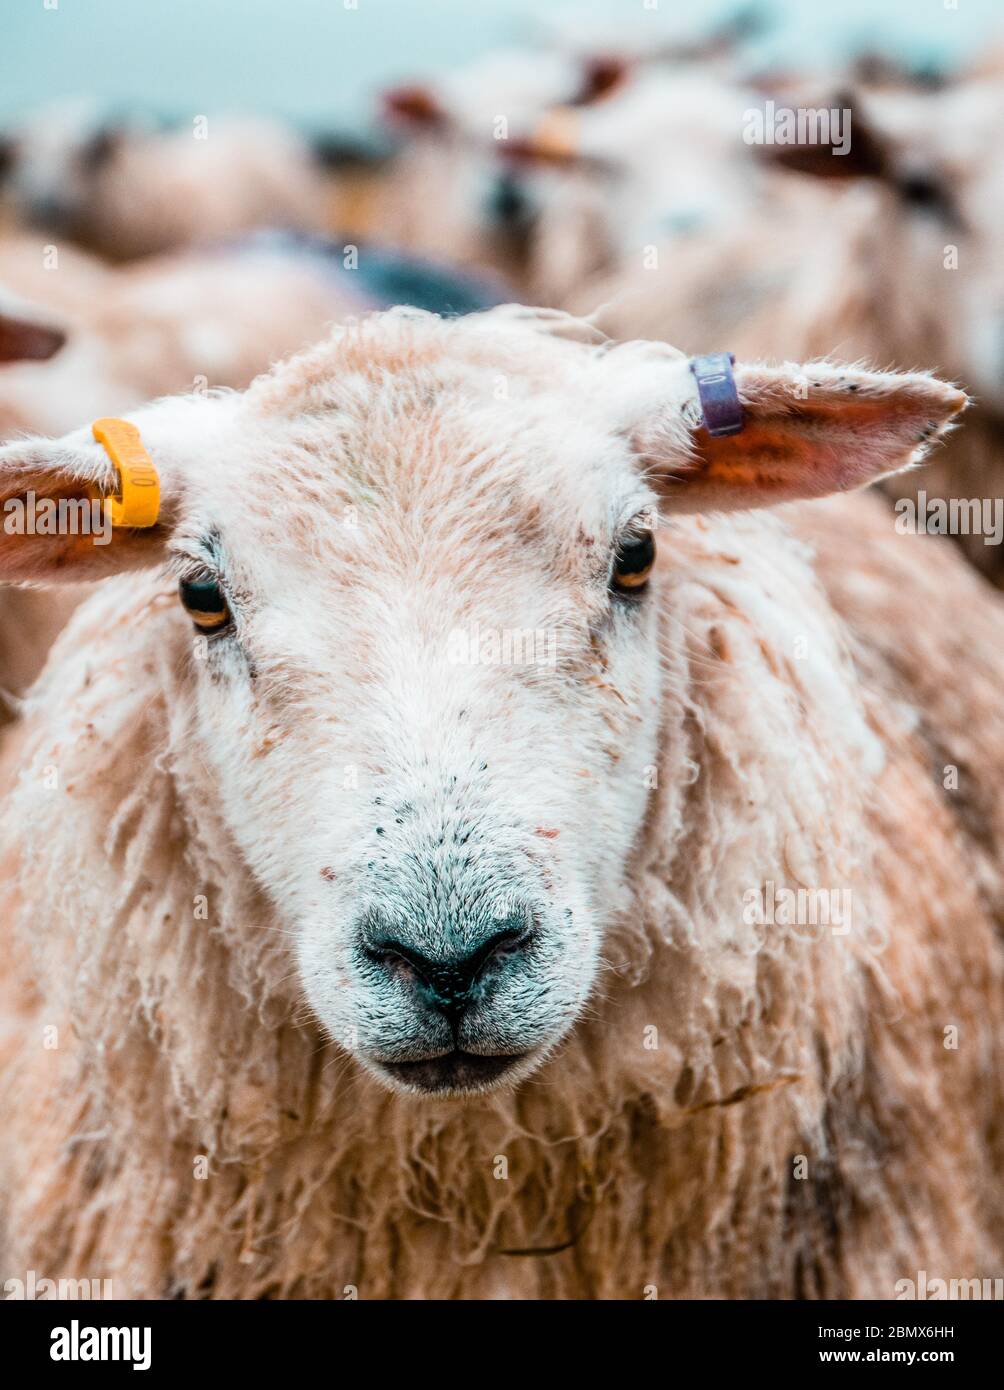 Shaggy sheep portrait - can't see. Stock Photo